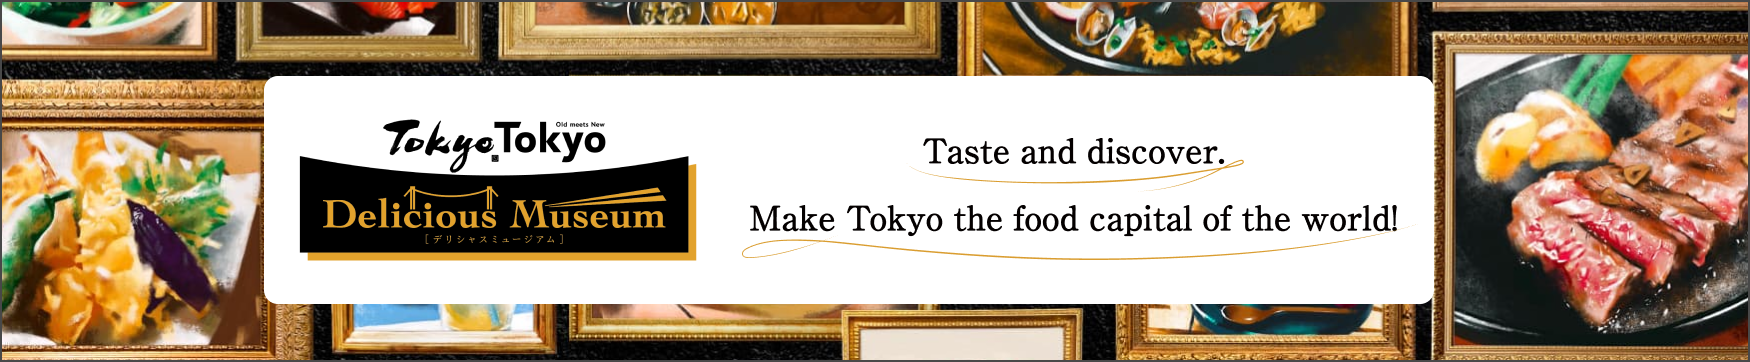 Tokyo Tokyo Delicious Museum Taste and discover. Make Tokyo the food capital of the world.